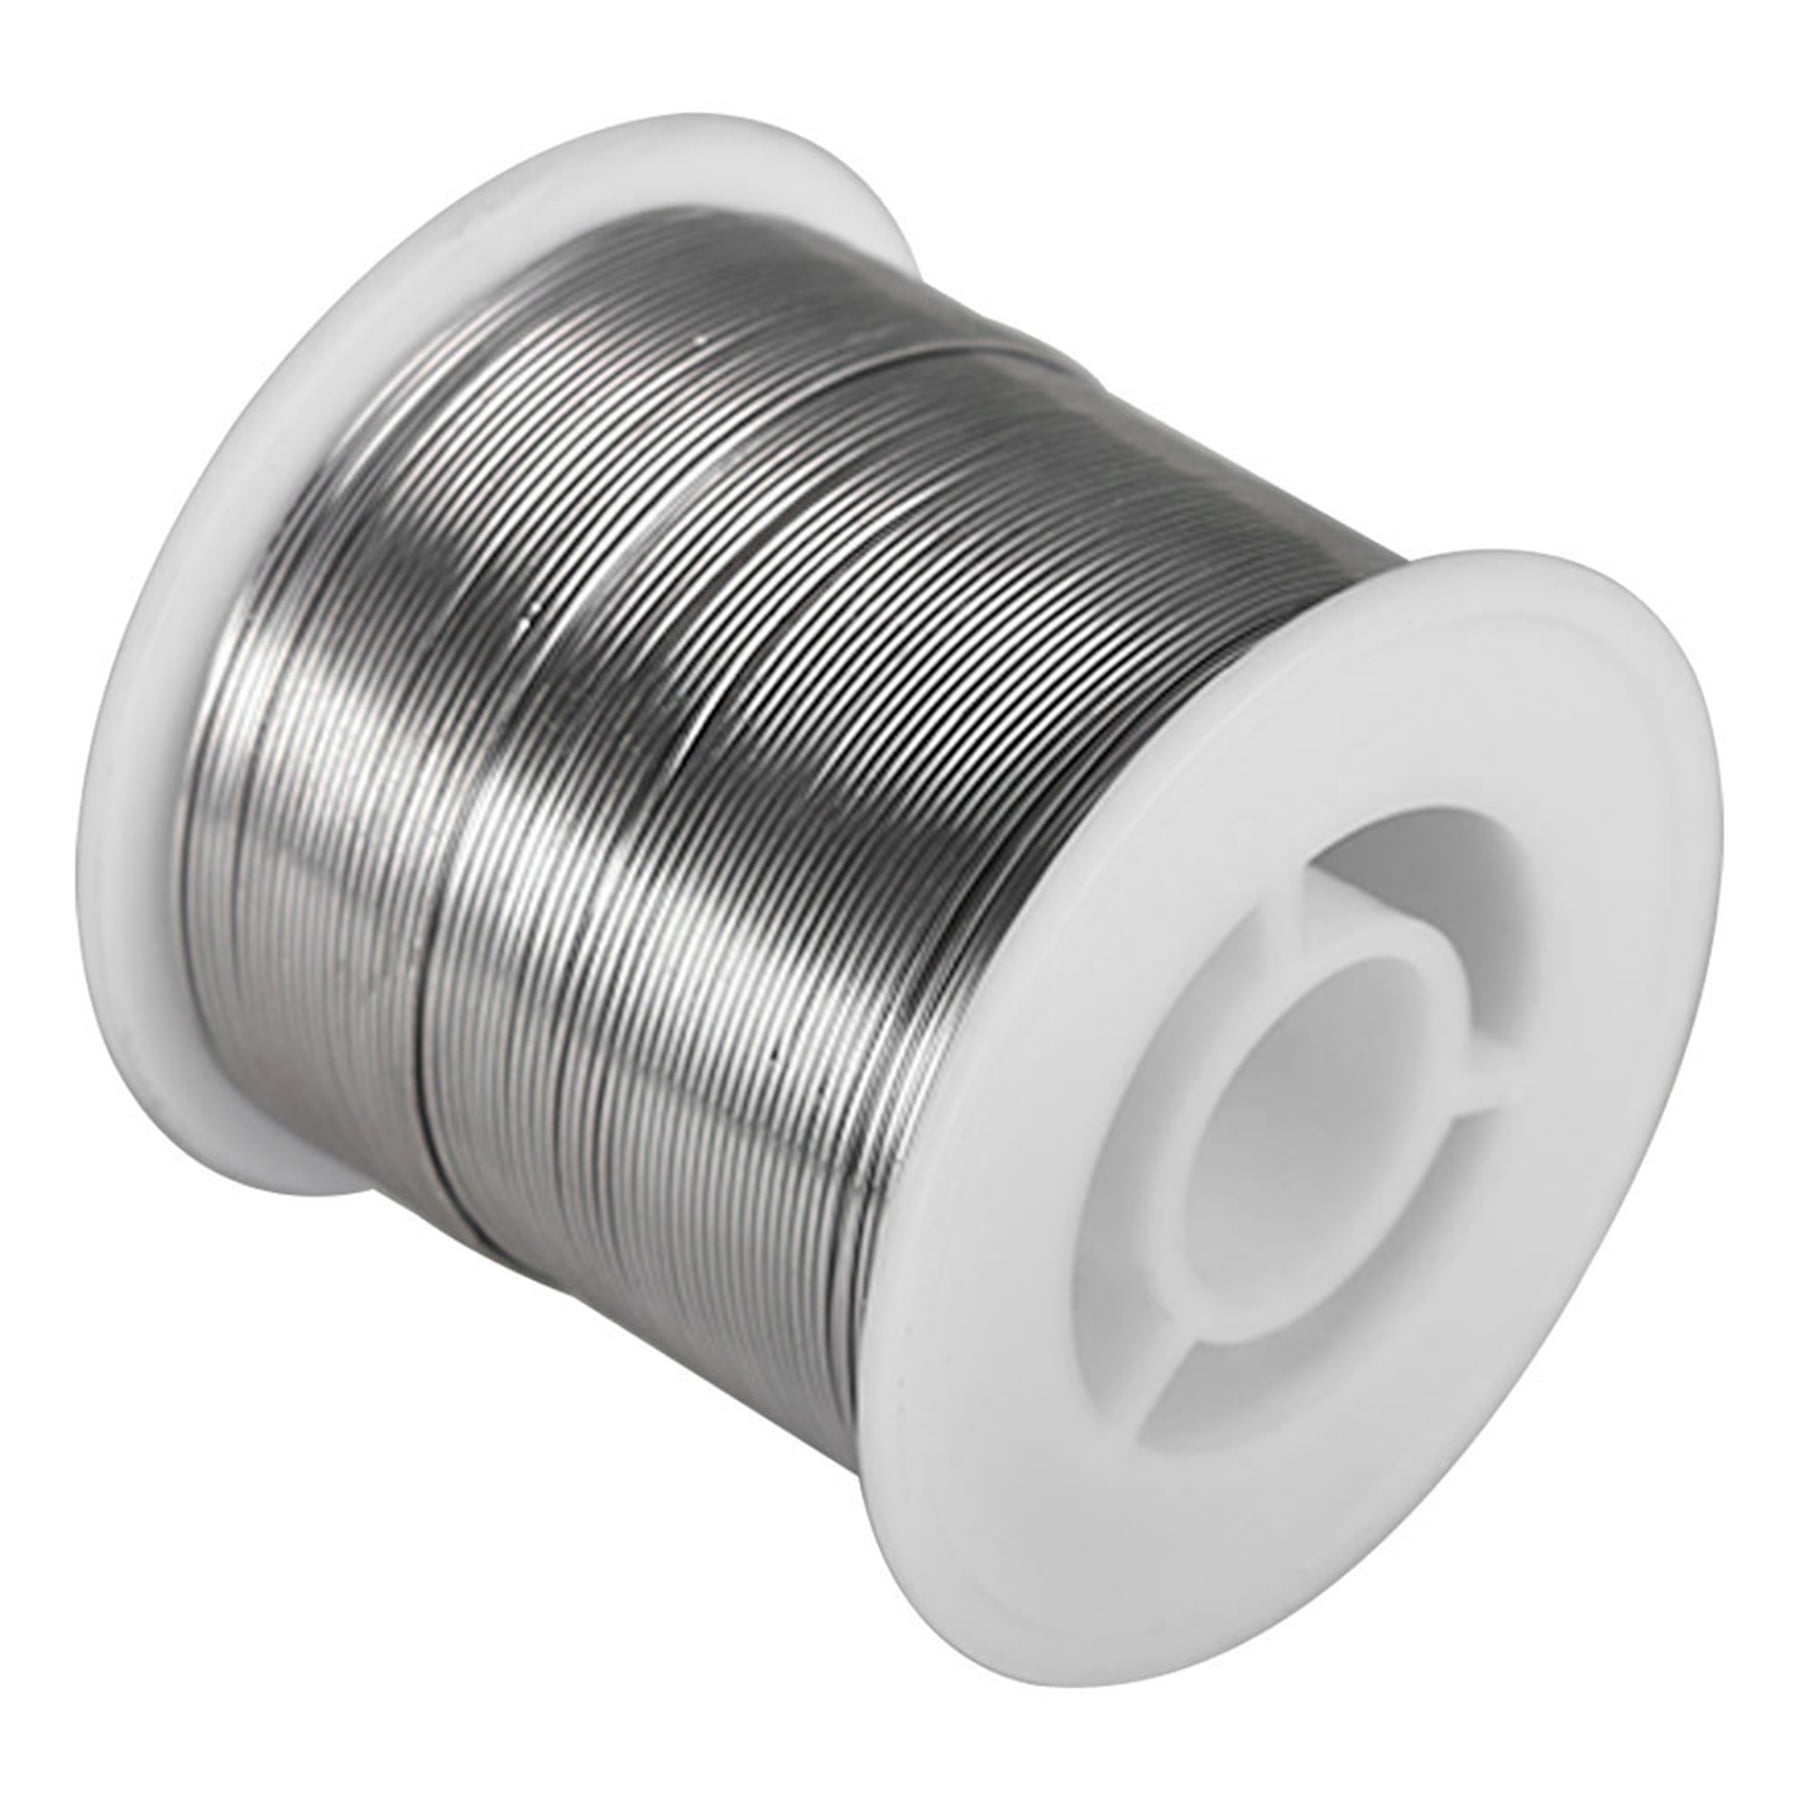 60/40 Tin Lead Rosin Core Solder Wire Electrical Sn60 Pb40 Flux 0.031"/0.8mm 1lb 